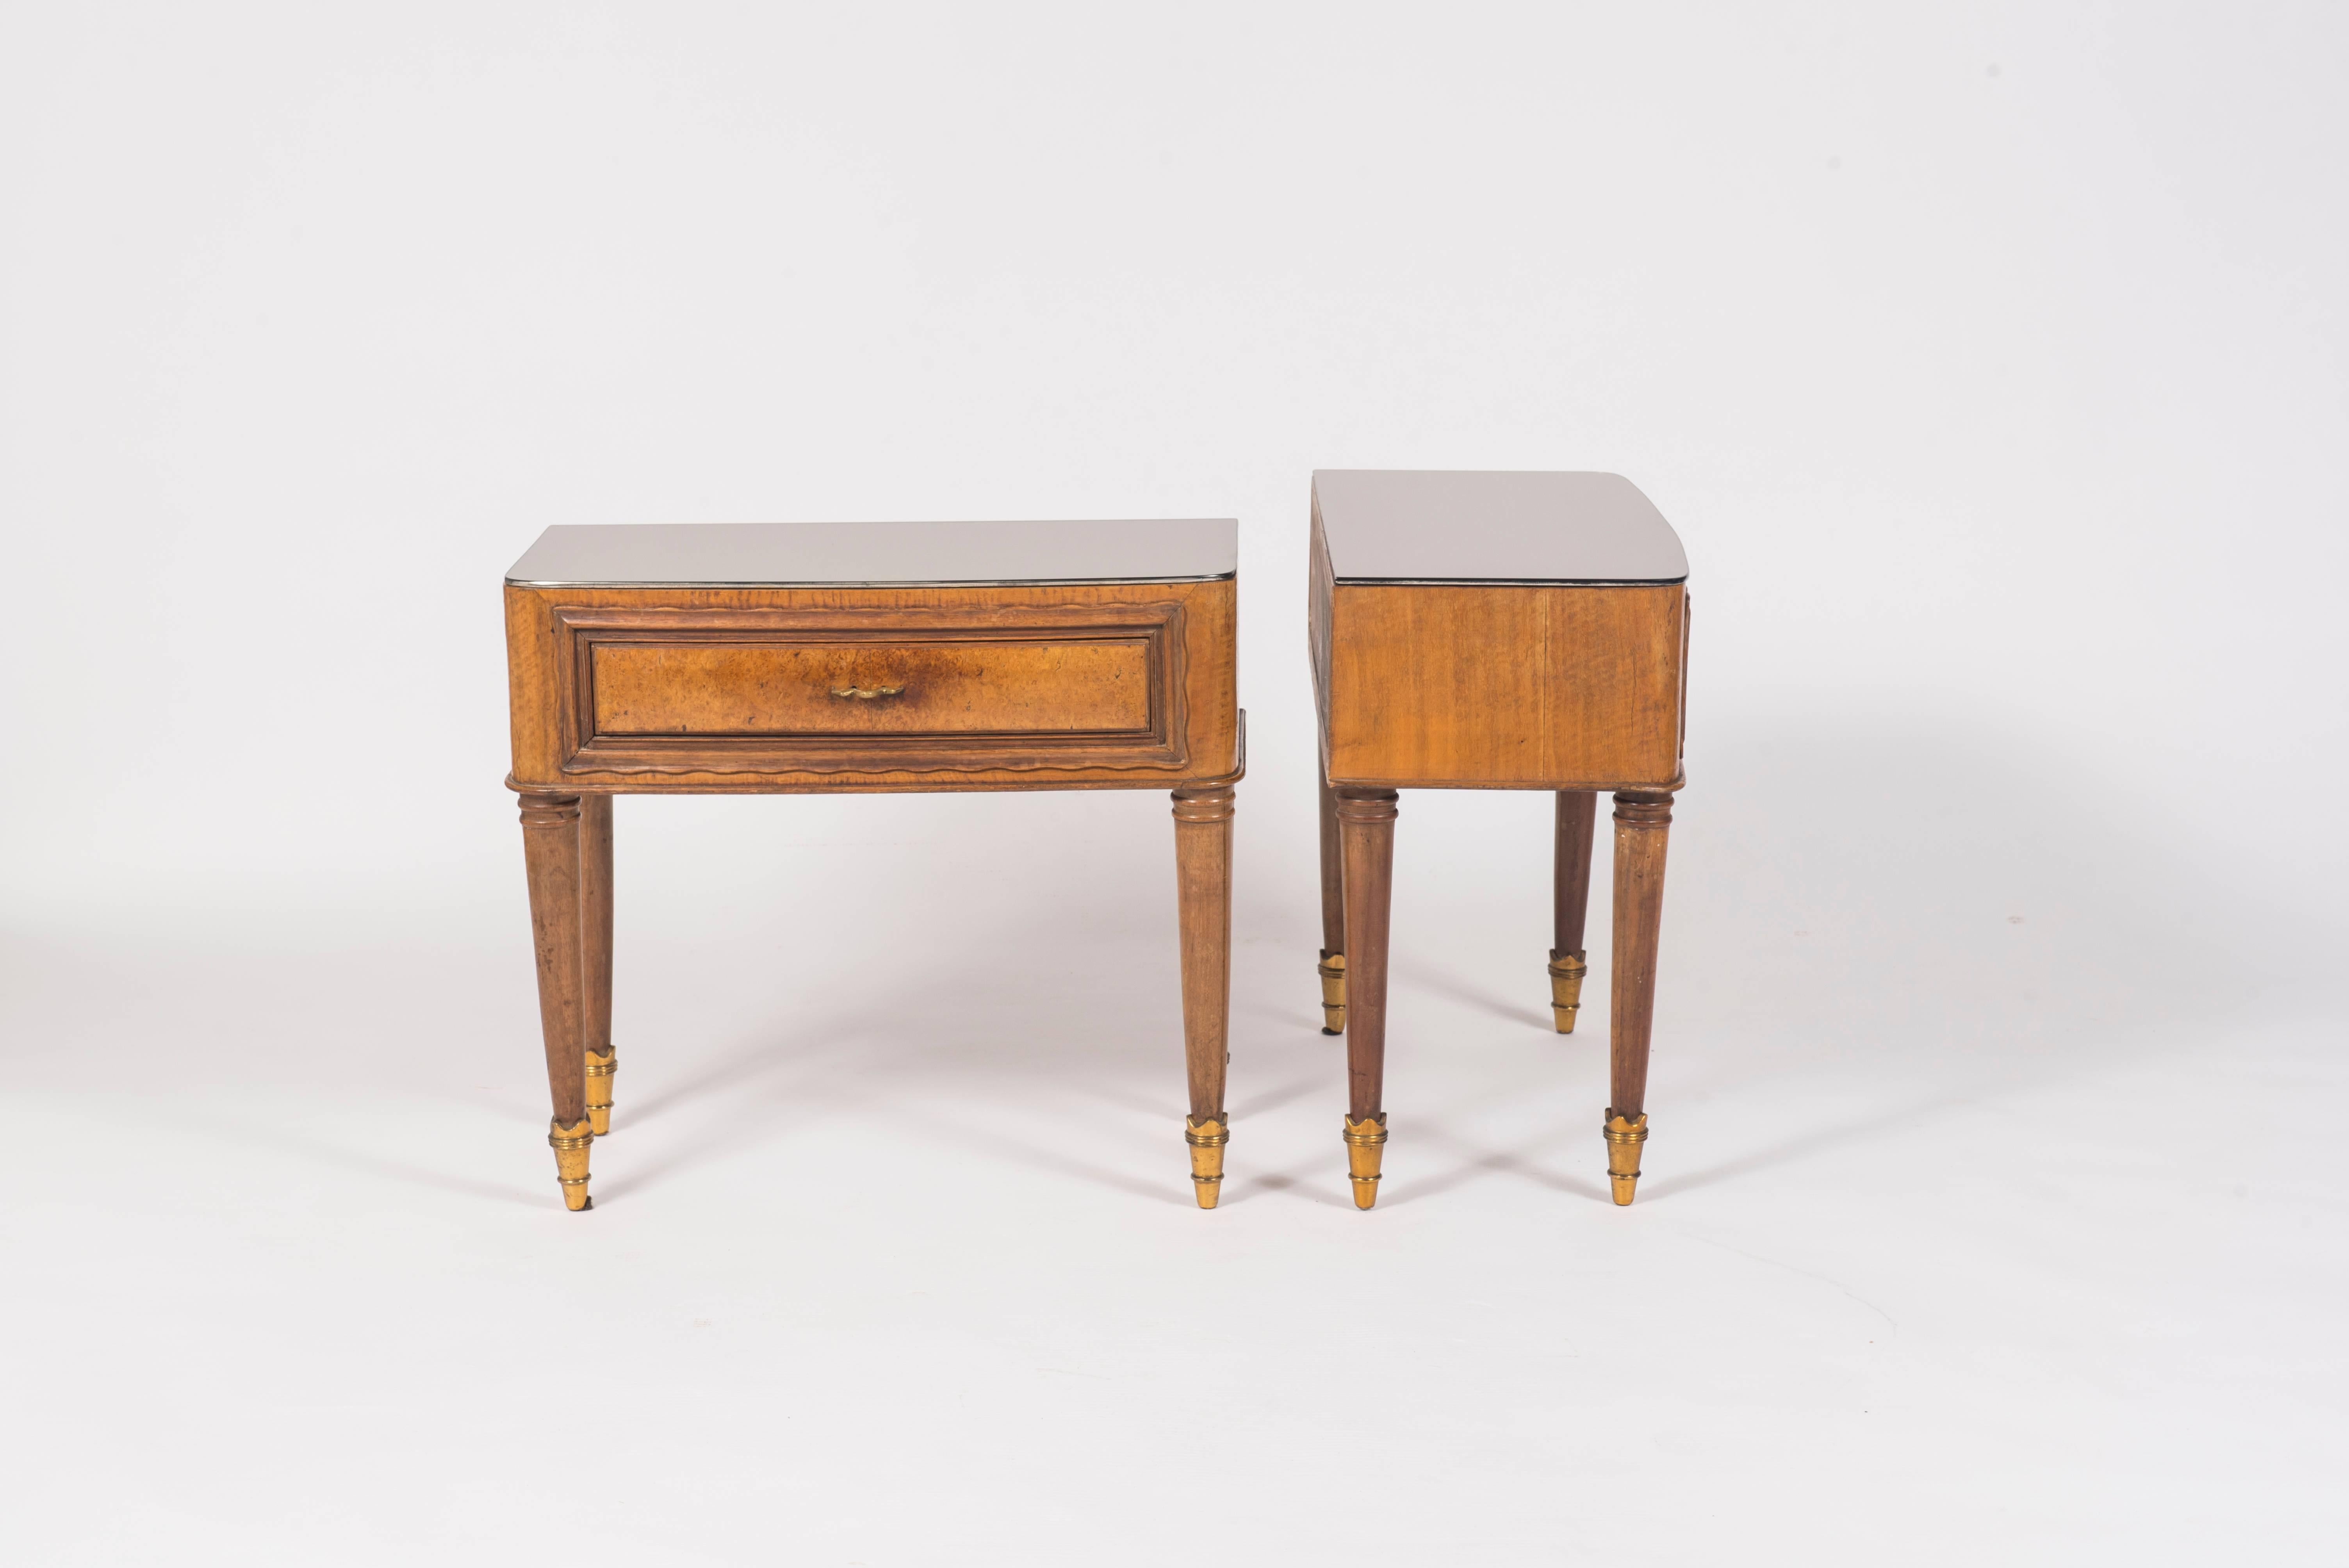 Pair of Italian side tables or night stands with mirrored glass tops, bronze pulls and sabots in the manner of Paolo Buffa